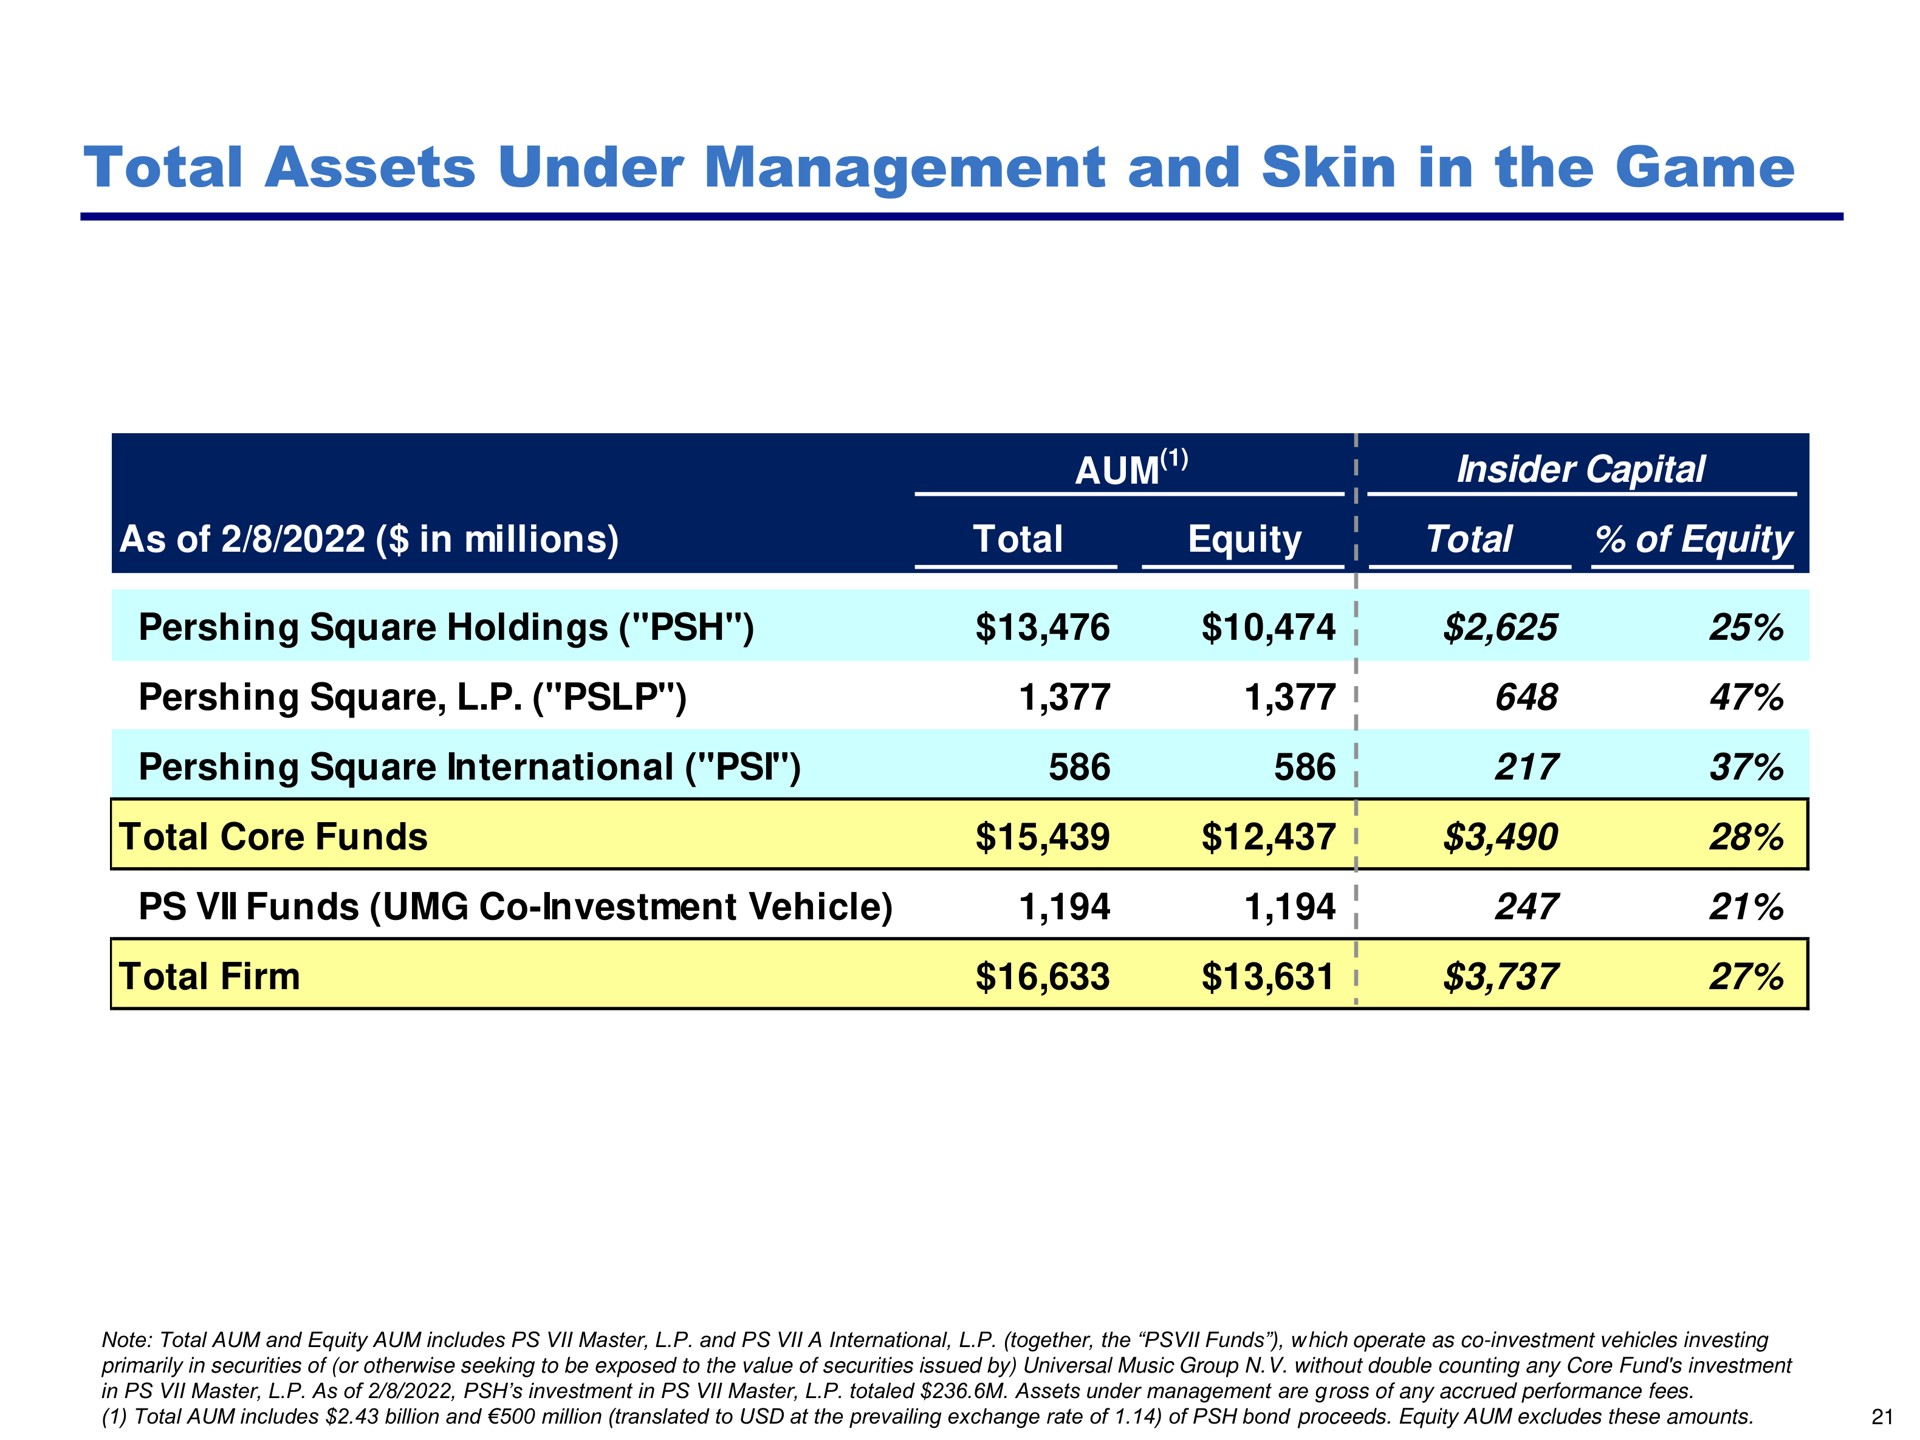 total assets under management and skin in the game aum insider capital square international psi core funds firm | Pershing Square